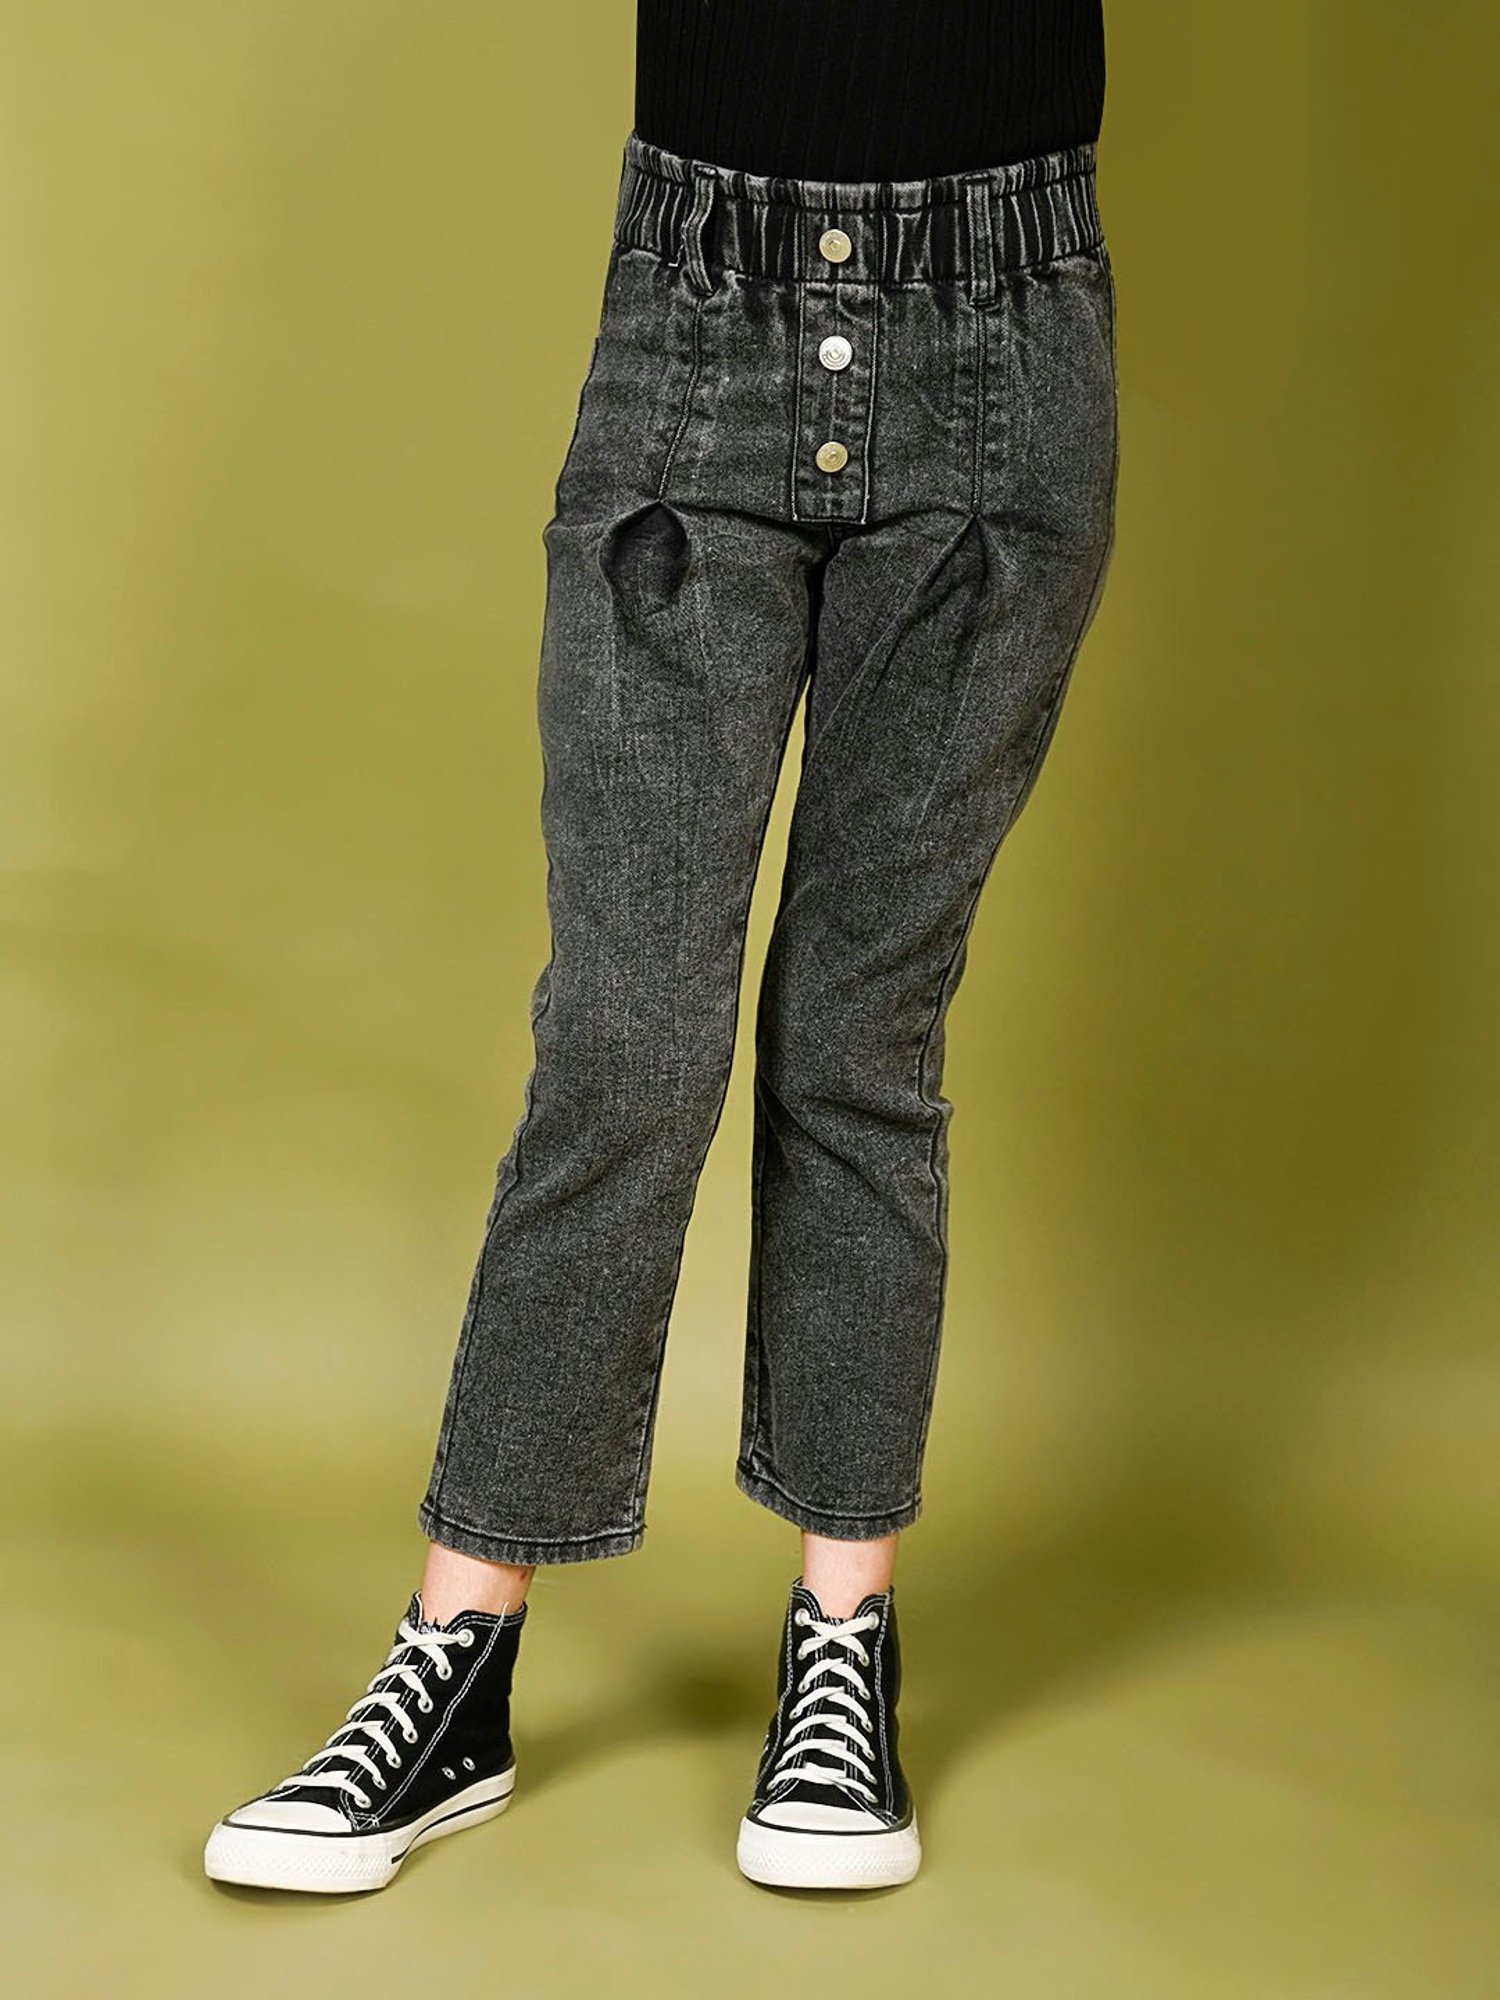 Buy Lilpicks Girls Solid Joggers Style Denim Jeans Pant Online at